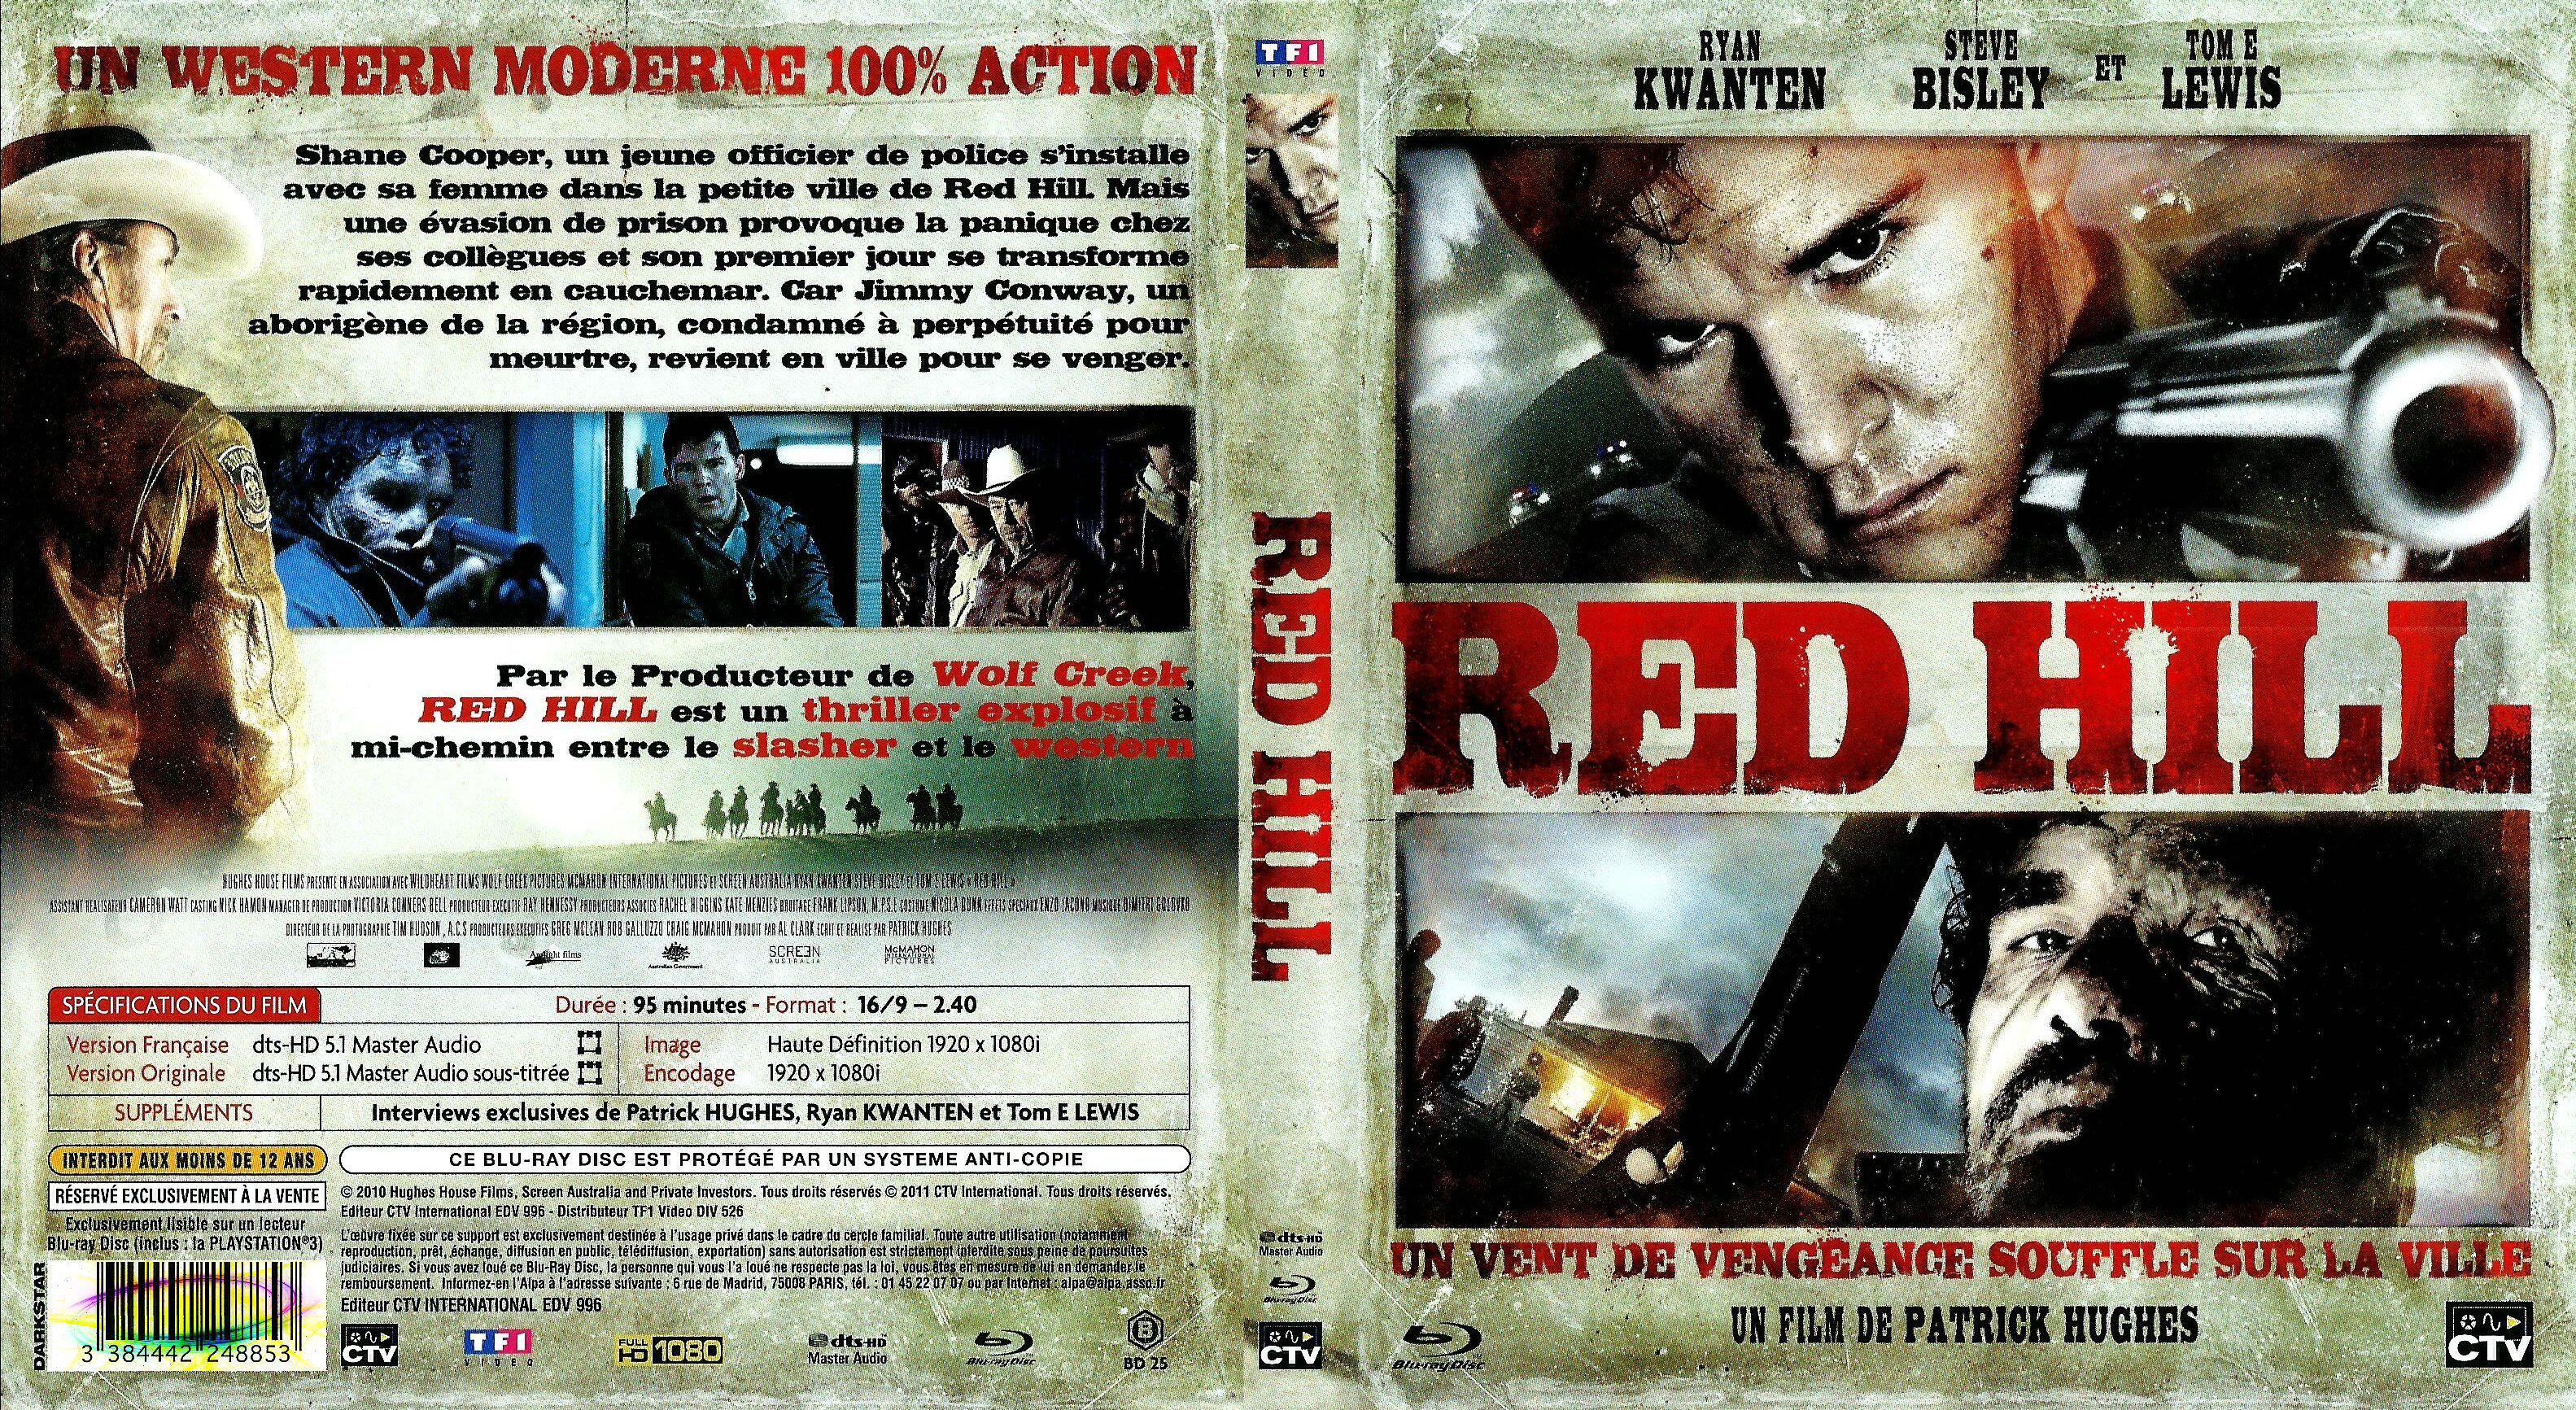 Jaquette DVD Red hill (BLU-RAY)